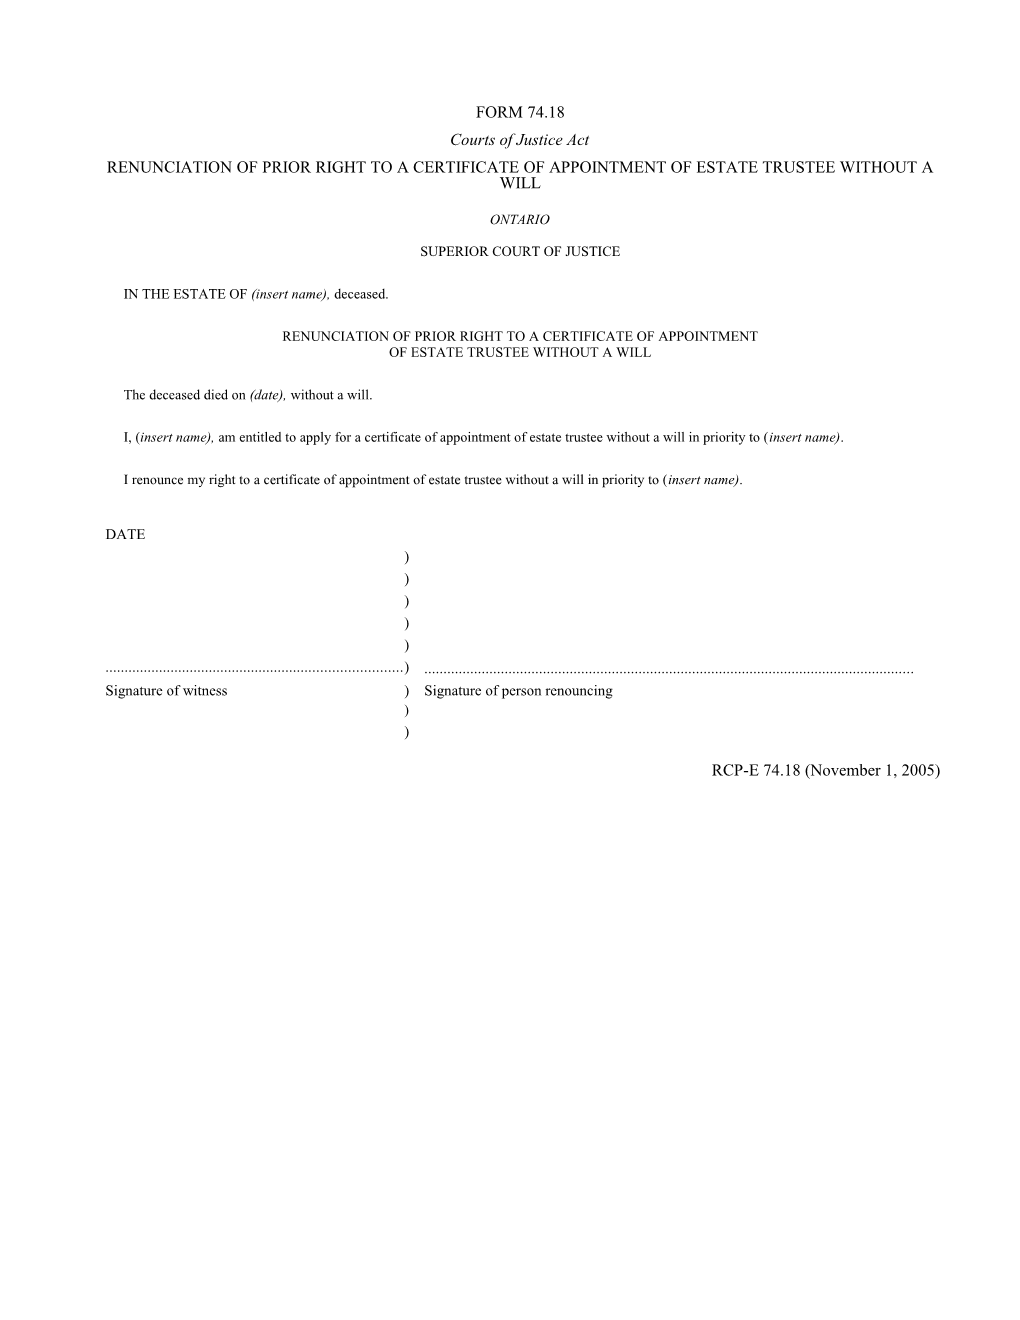 Form 74.18 Renunciation of Prior Right to a Certificate of Appointment of Estate Trustee